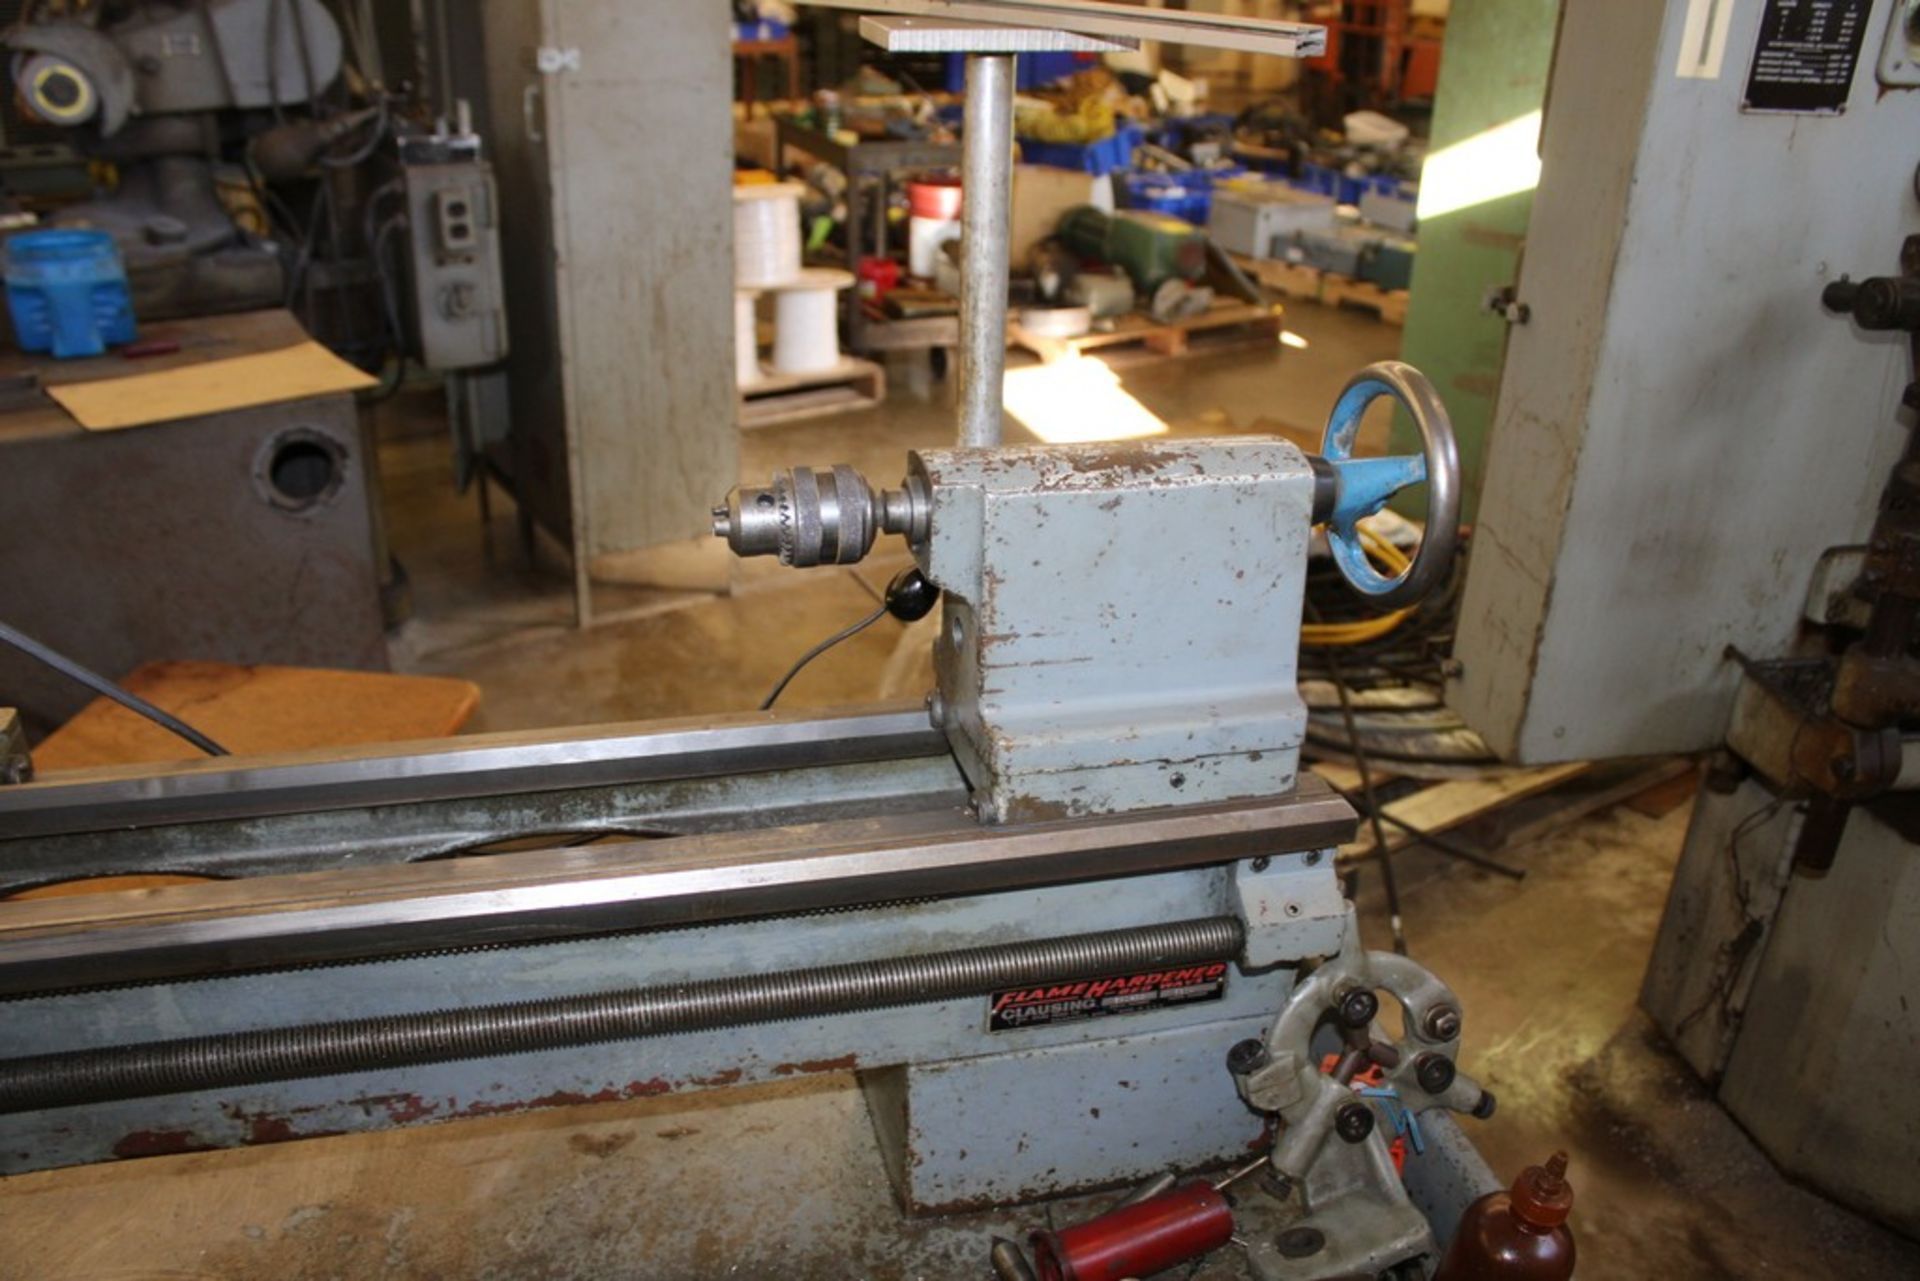 CLAUSING 12"X36" MODEL 5914 TOOLROOM LATHE, S/N 501411, 2,000 RPM SPINDLE, WITH 3-JAW CHUCK, INCH - Image 4 of 6